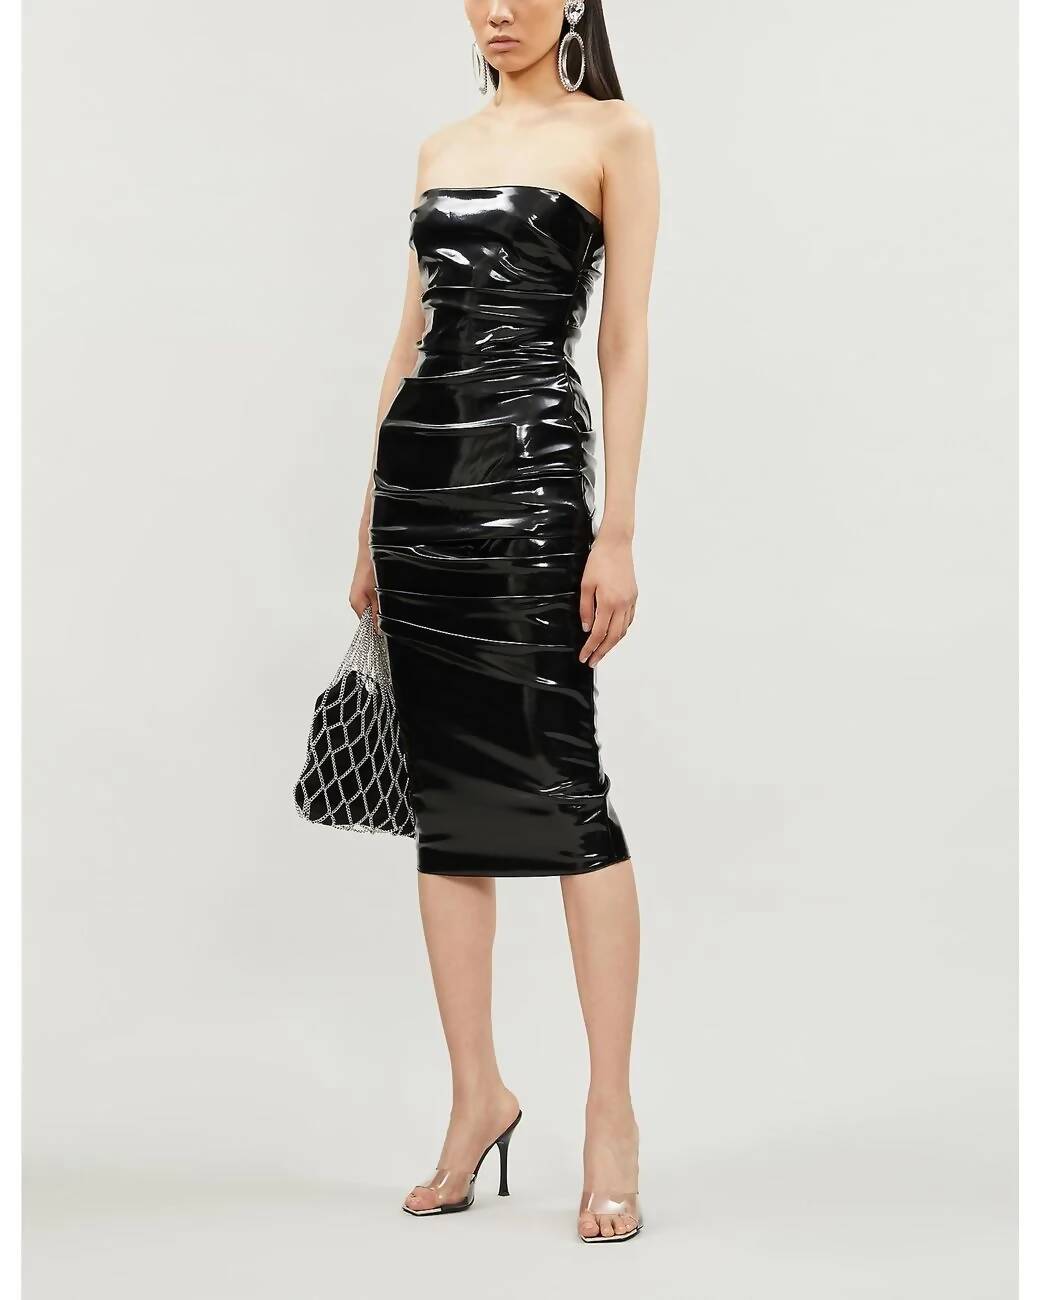 Alex Perry Decon Ruched Faux Leather Dress